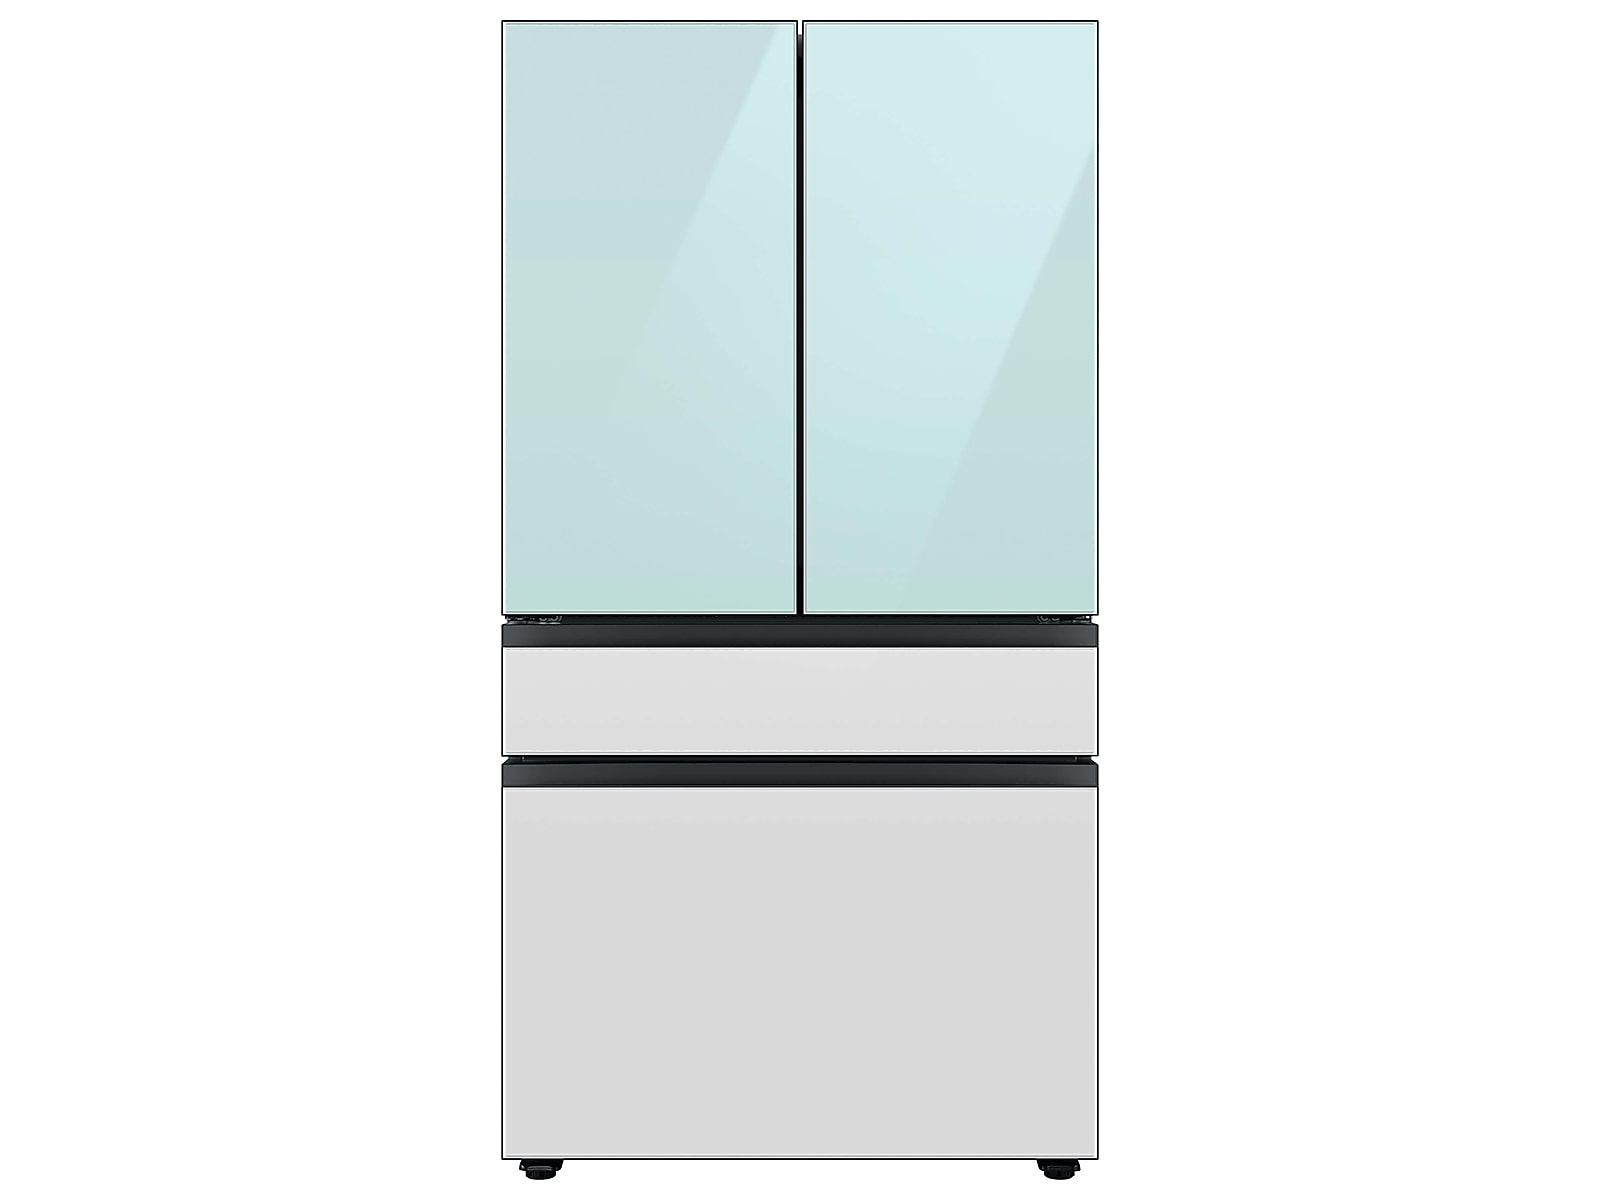 Samsung Bespoke 4-Door French Door Refrigerator in Morning Blue Glass Top/ White Glass Middle/ White Glass Bottom (23 cu. ft.) with Beverage Center™ in Morning Blue Glass Top Panels and White Glass Middle and Bottom Panels